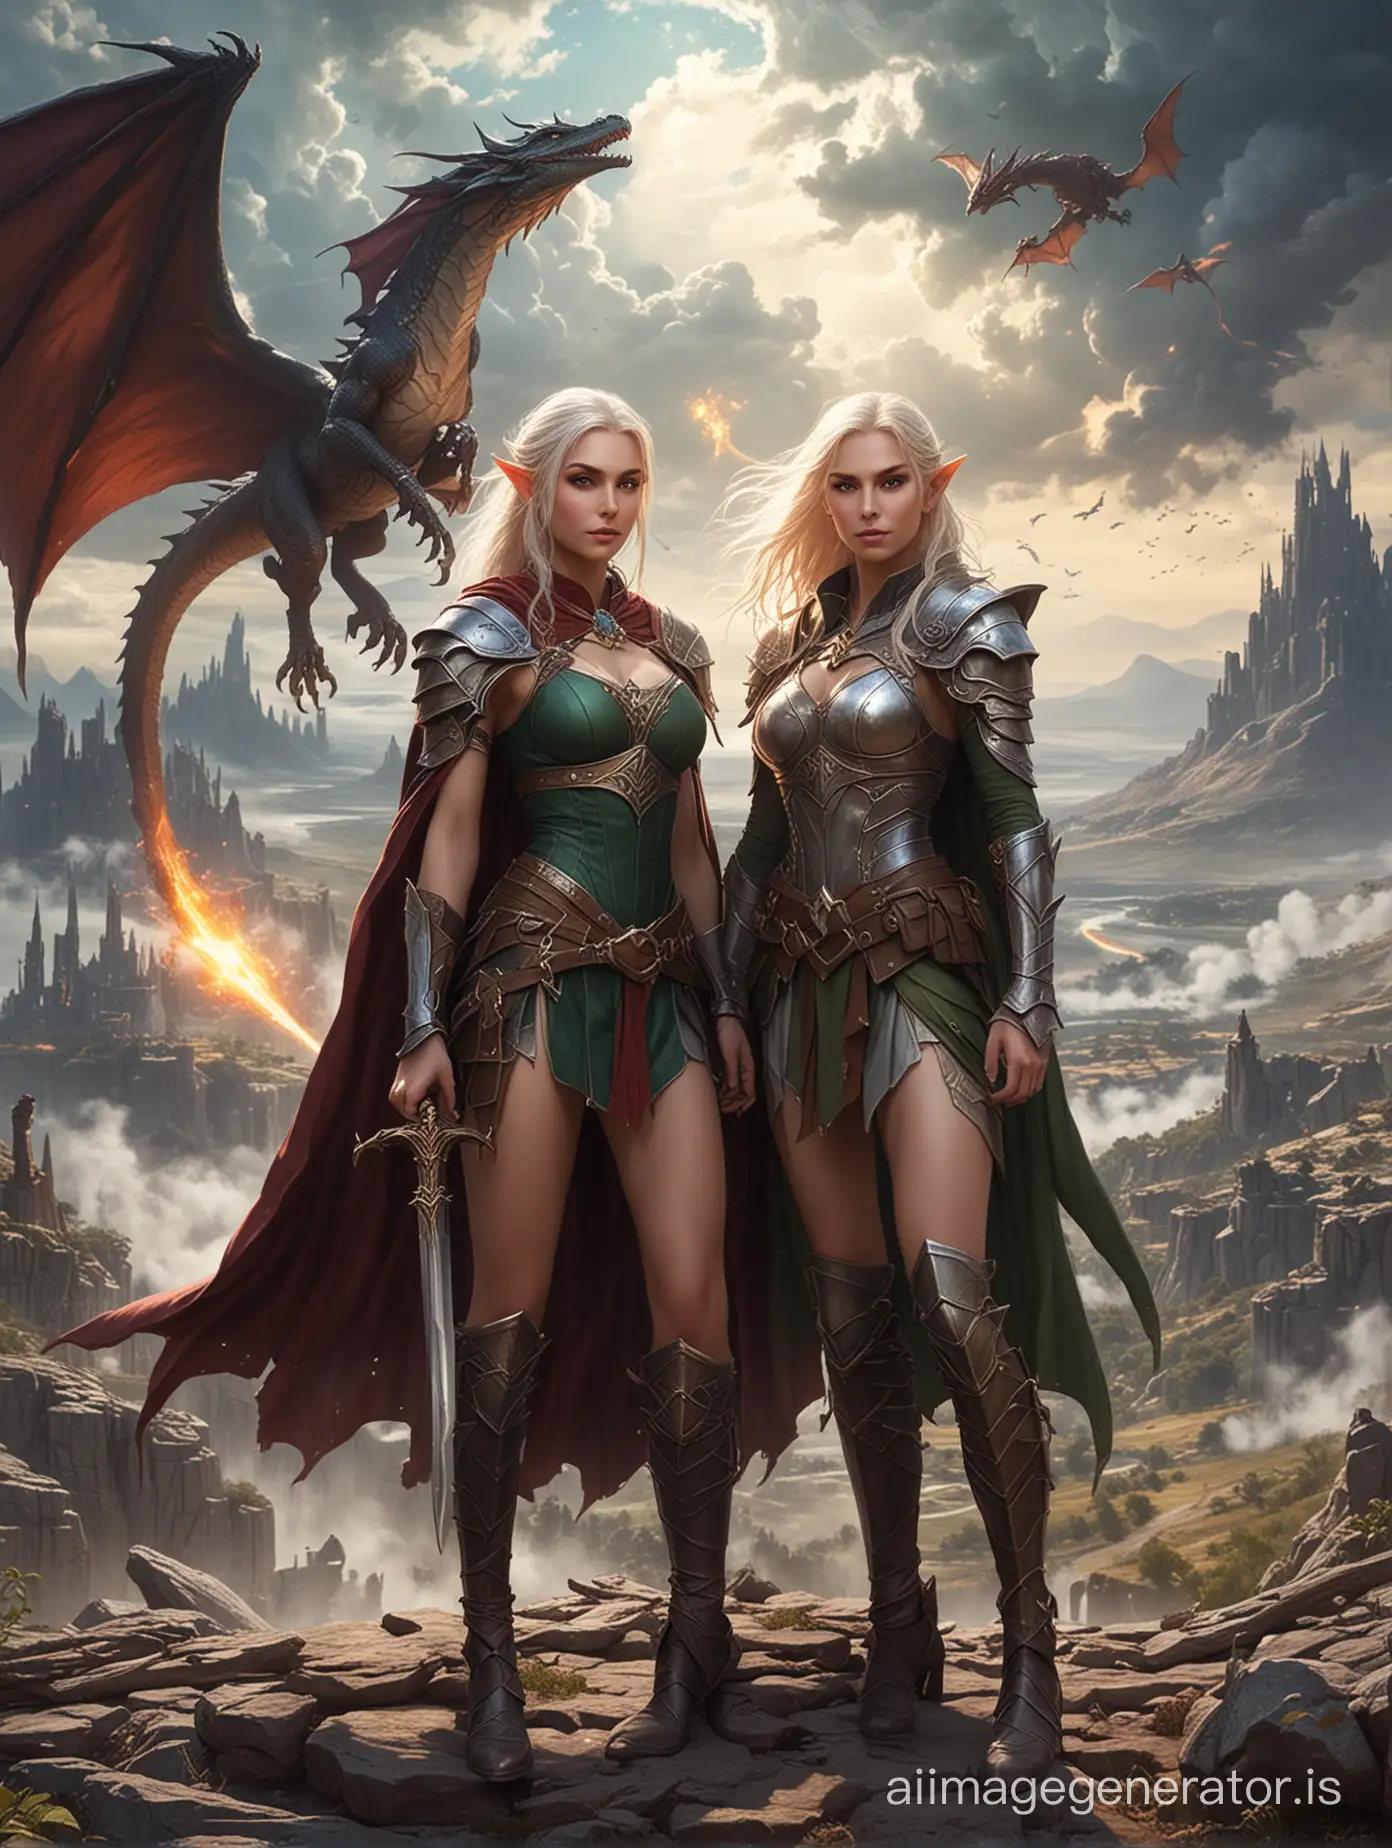 Female-Elven-Warrior-and-Mage-in-Fantasy-Battlefield-with-Dragon